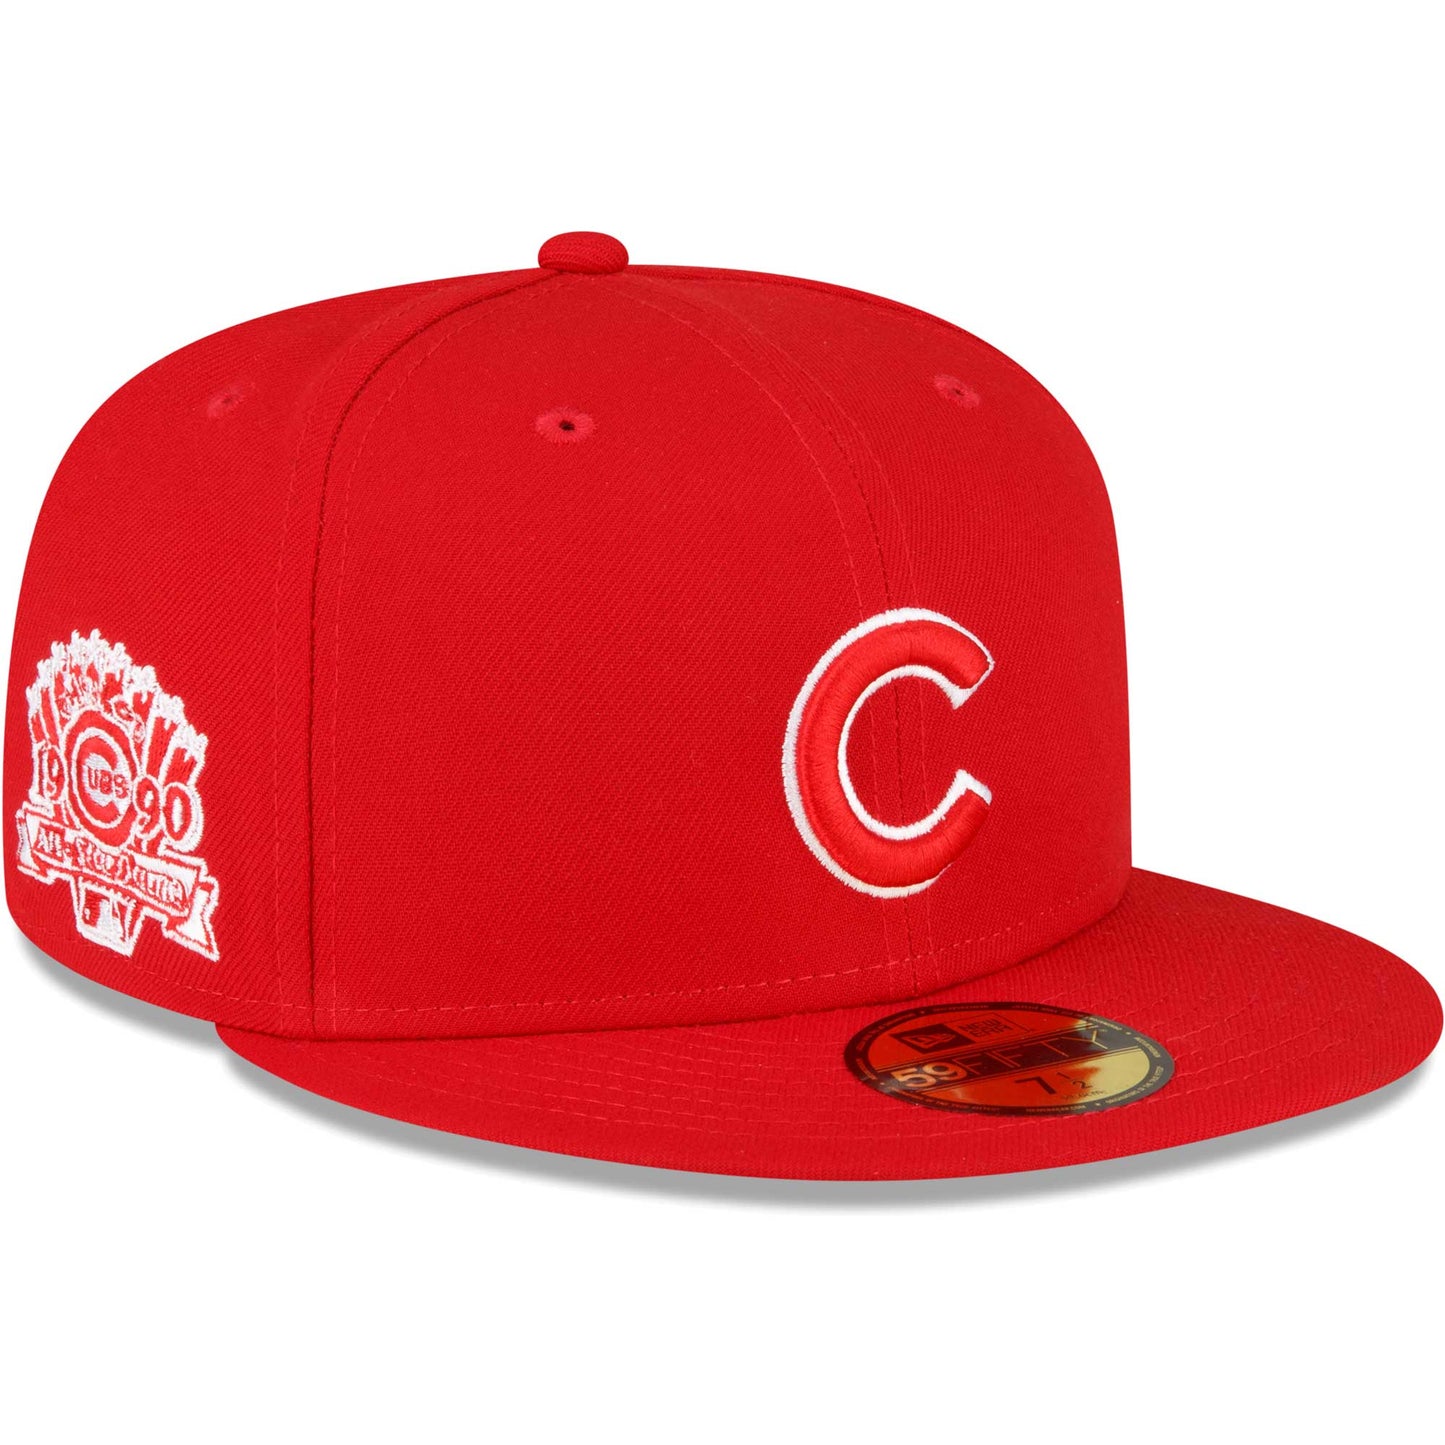 Chicago Cubs New Era Sidepatch 59FIFTY Fitted Hat - Red